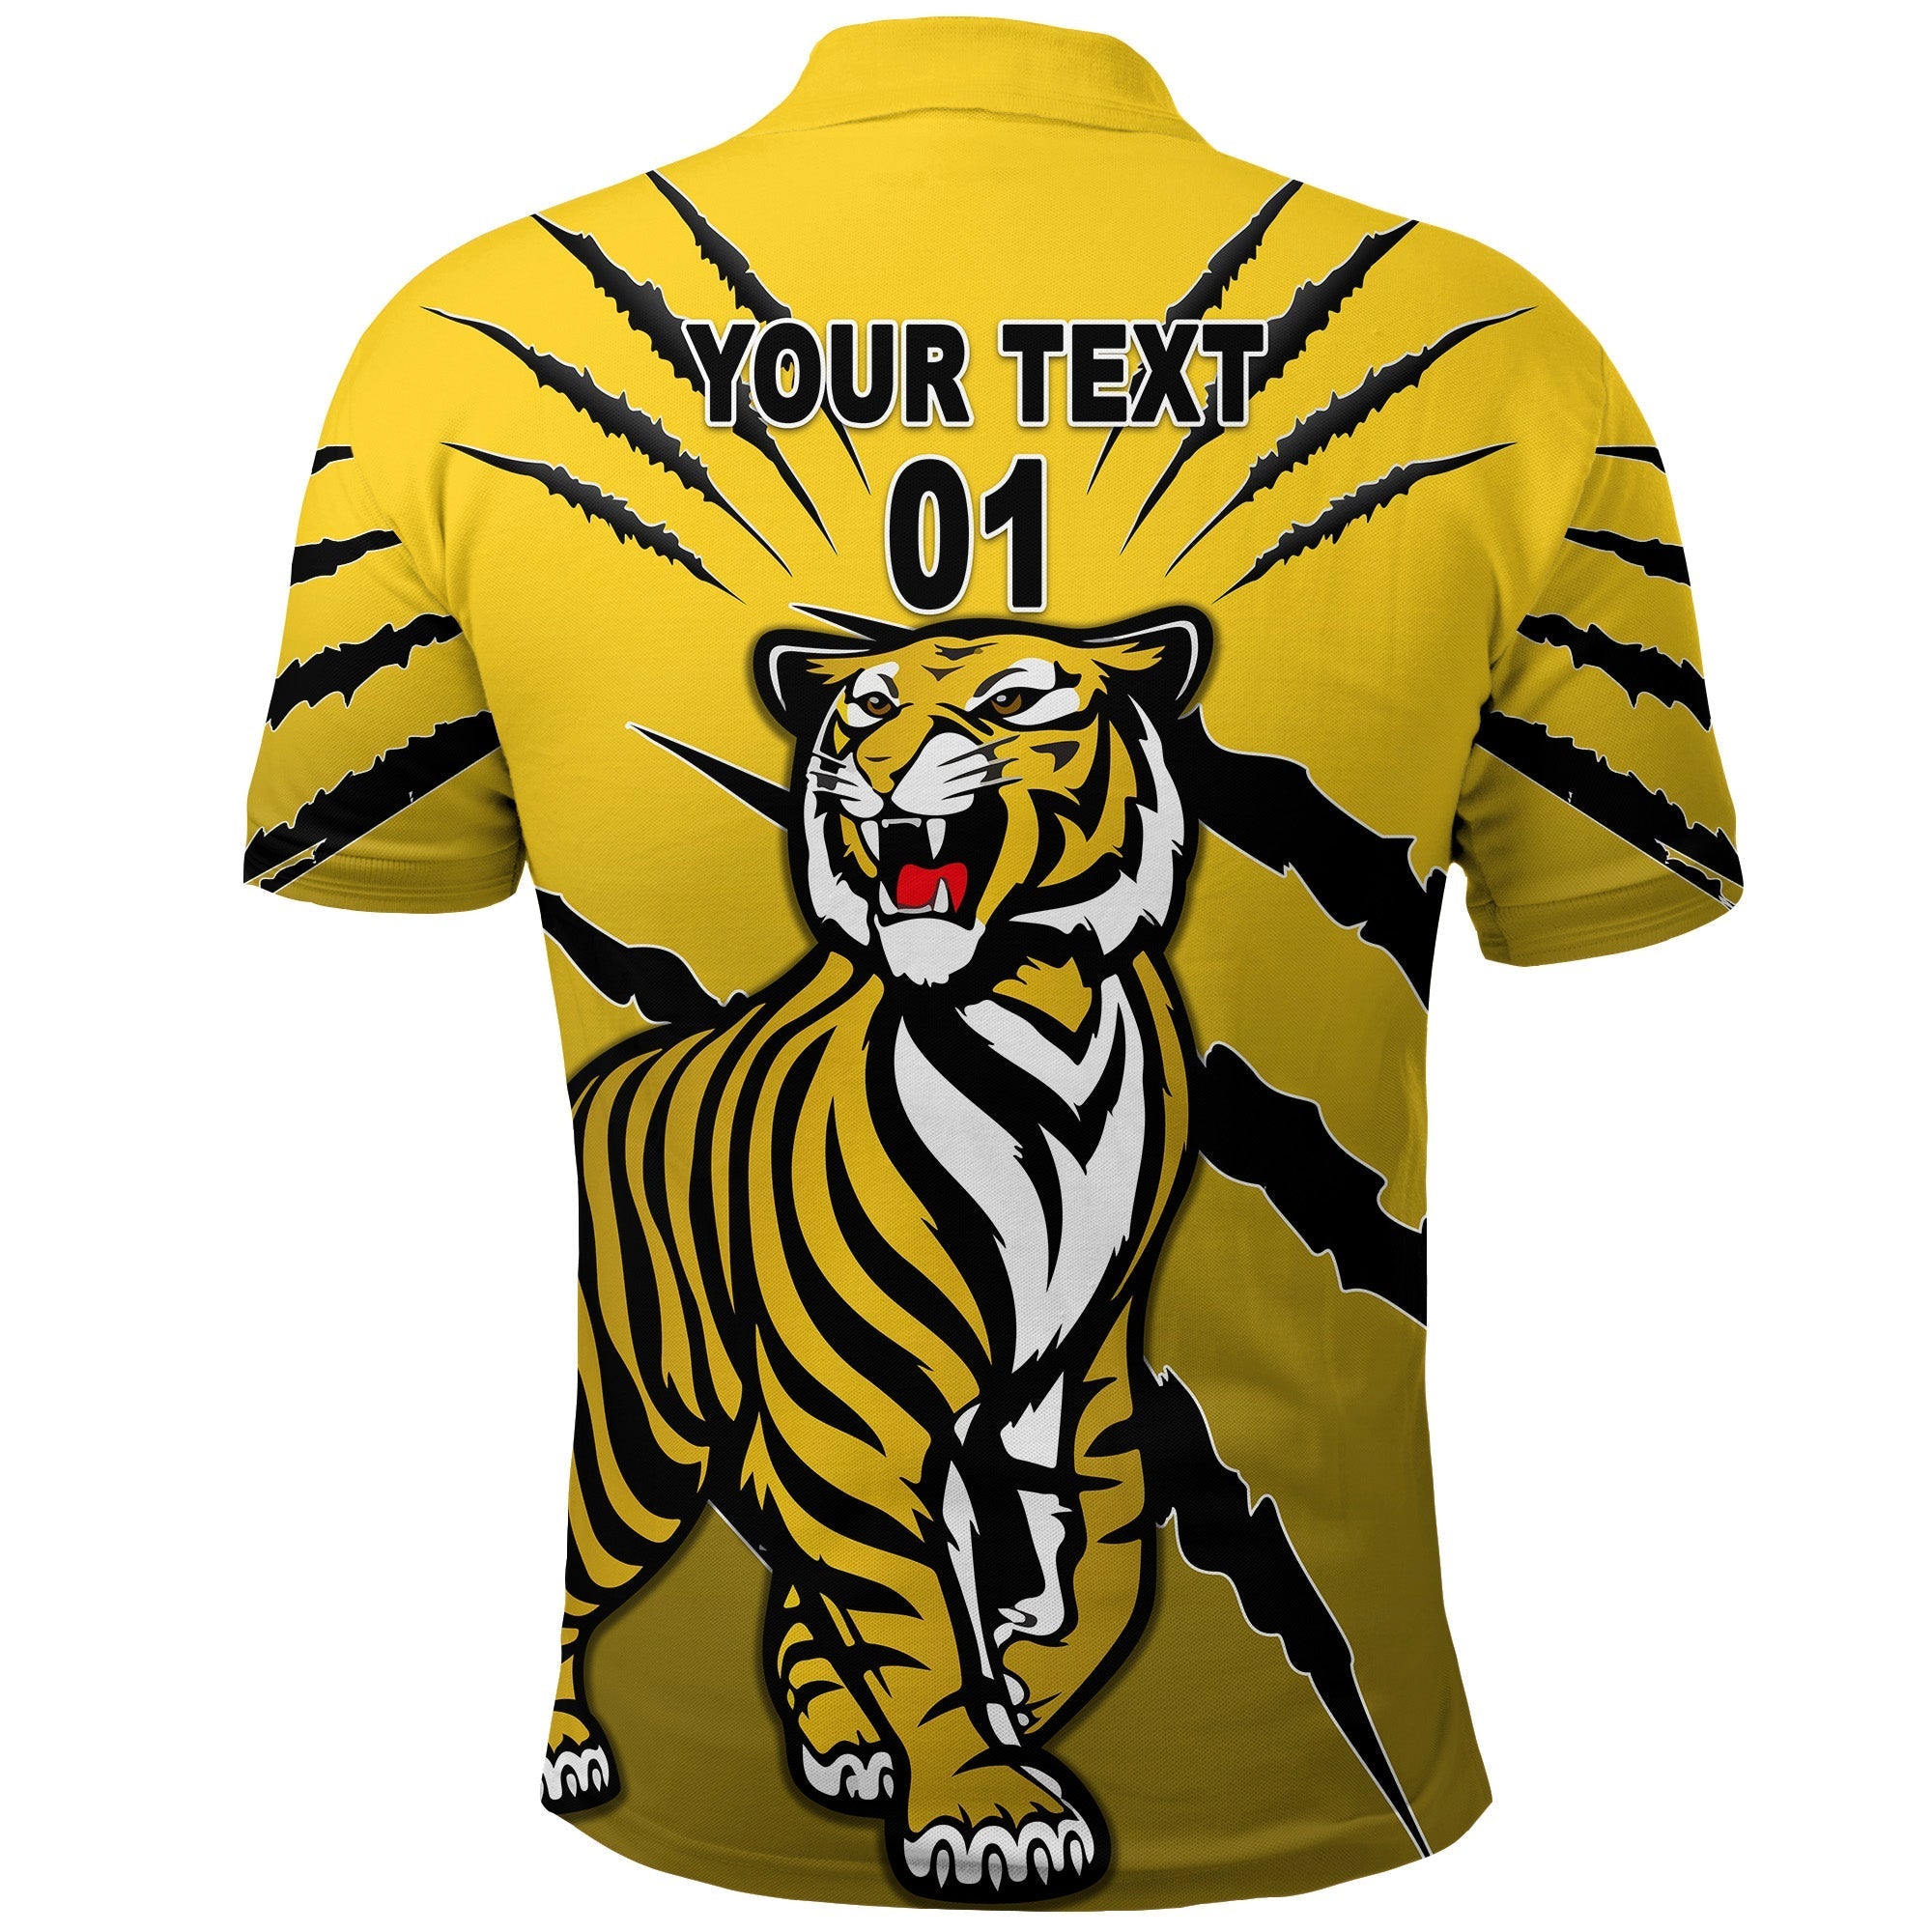 custom-personalised-richmond-tigers-polo-shirt-original-version-yellow-custom-text-and-number-lt8